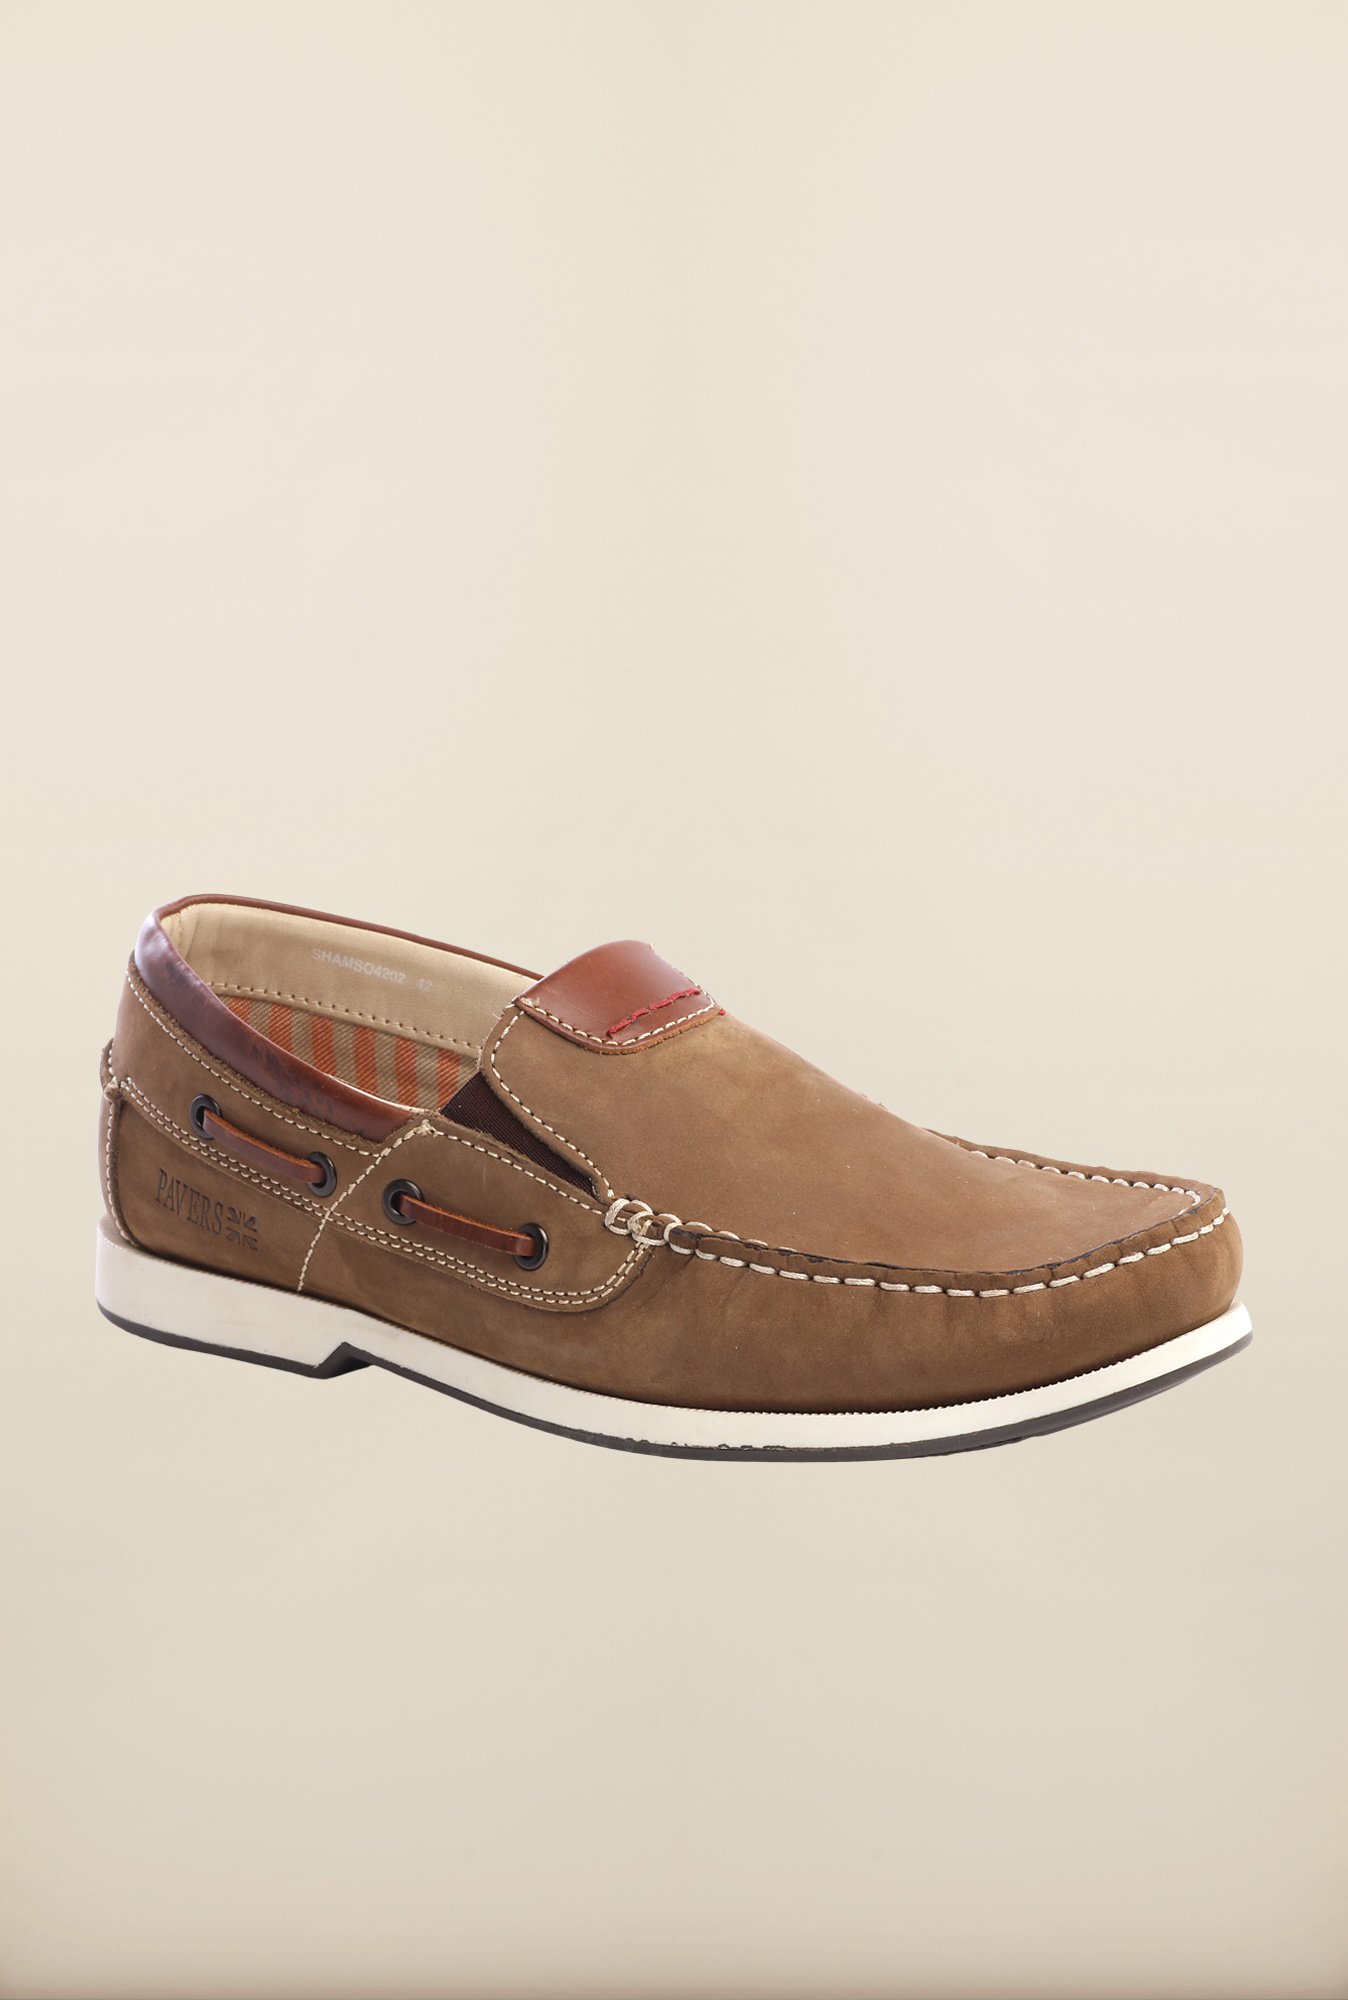 Buy Pavers England Tan Loafers Online 